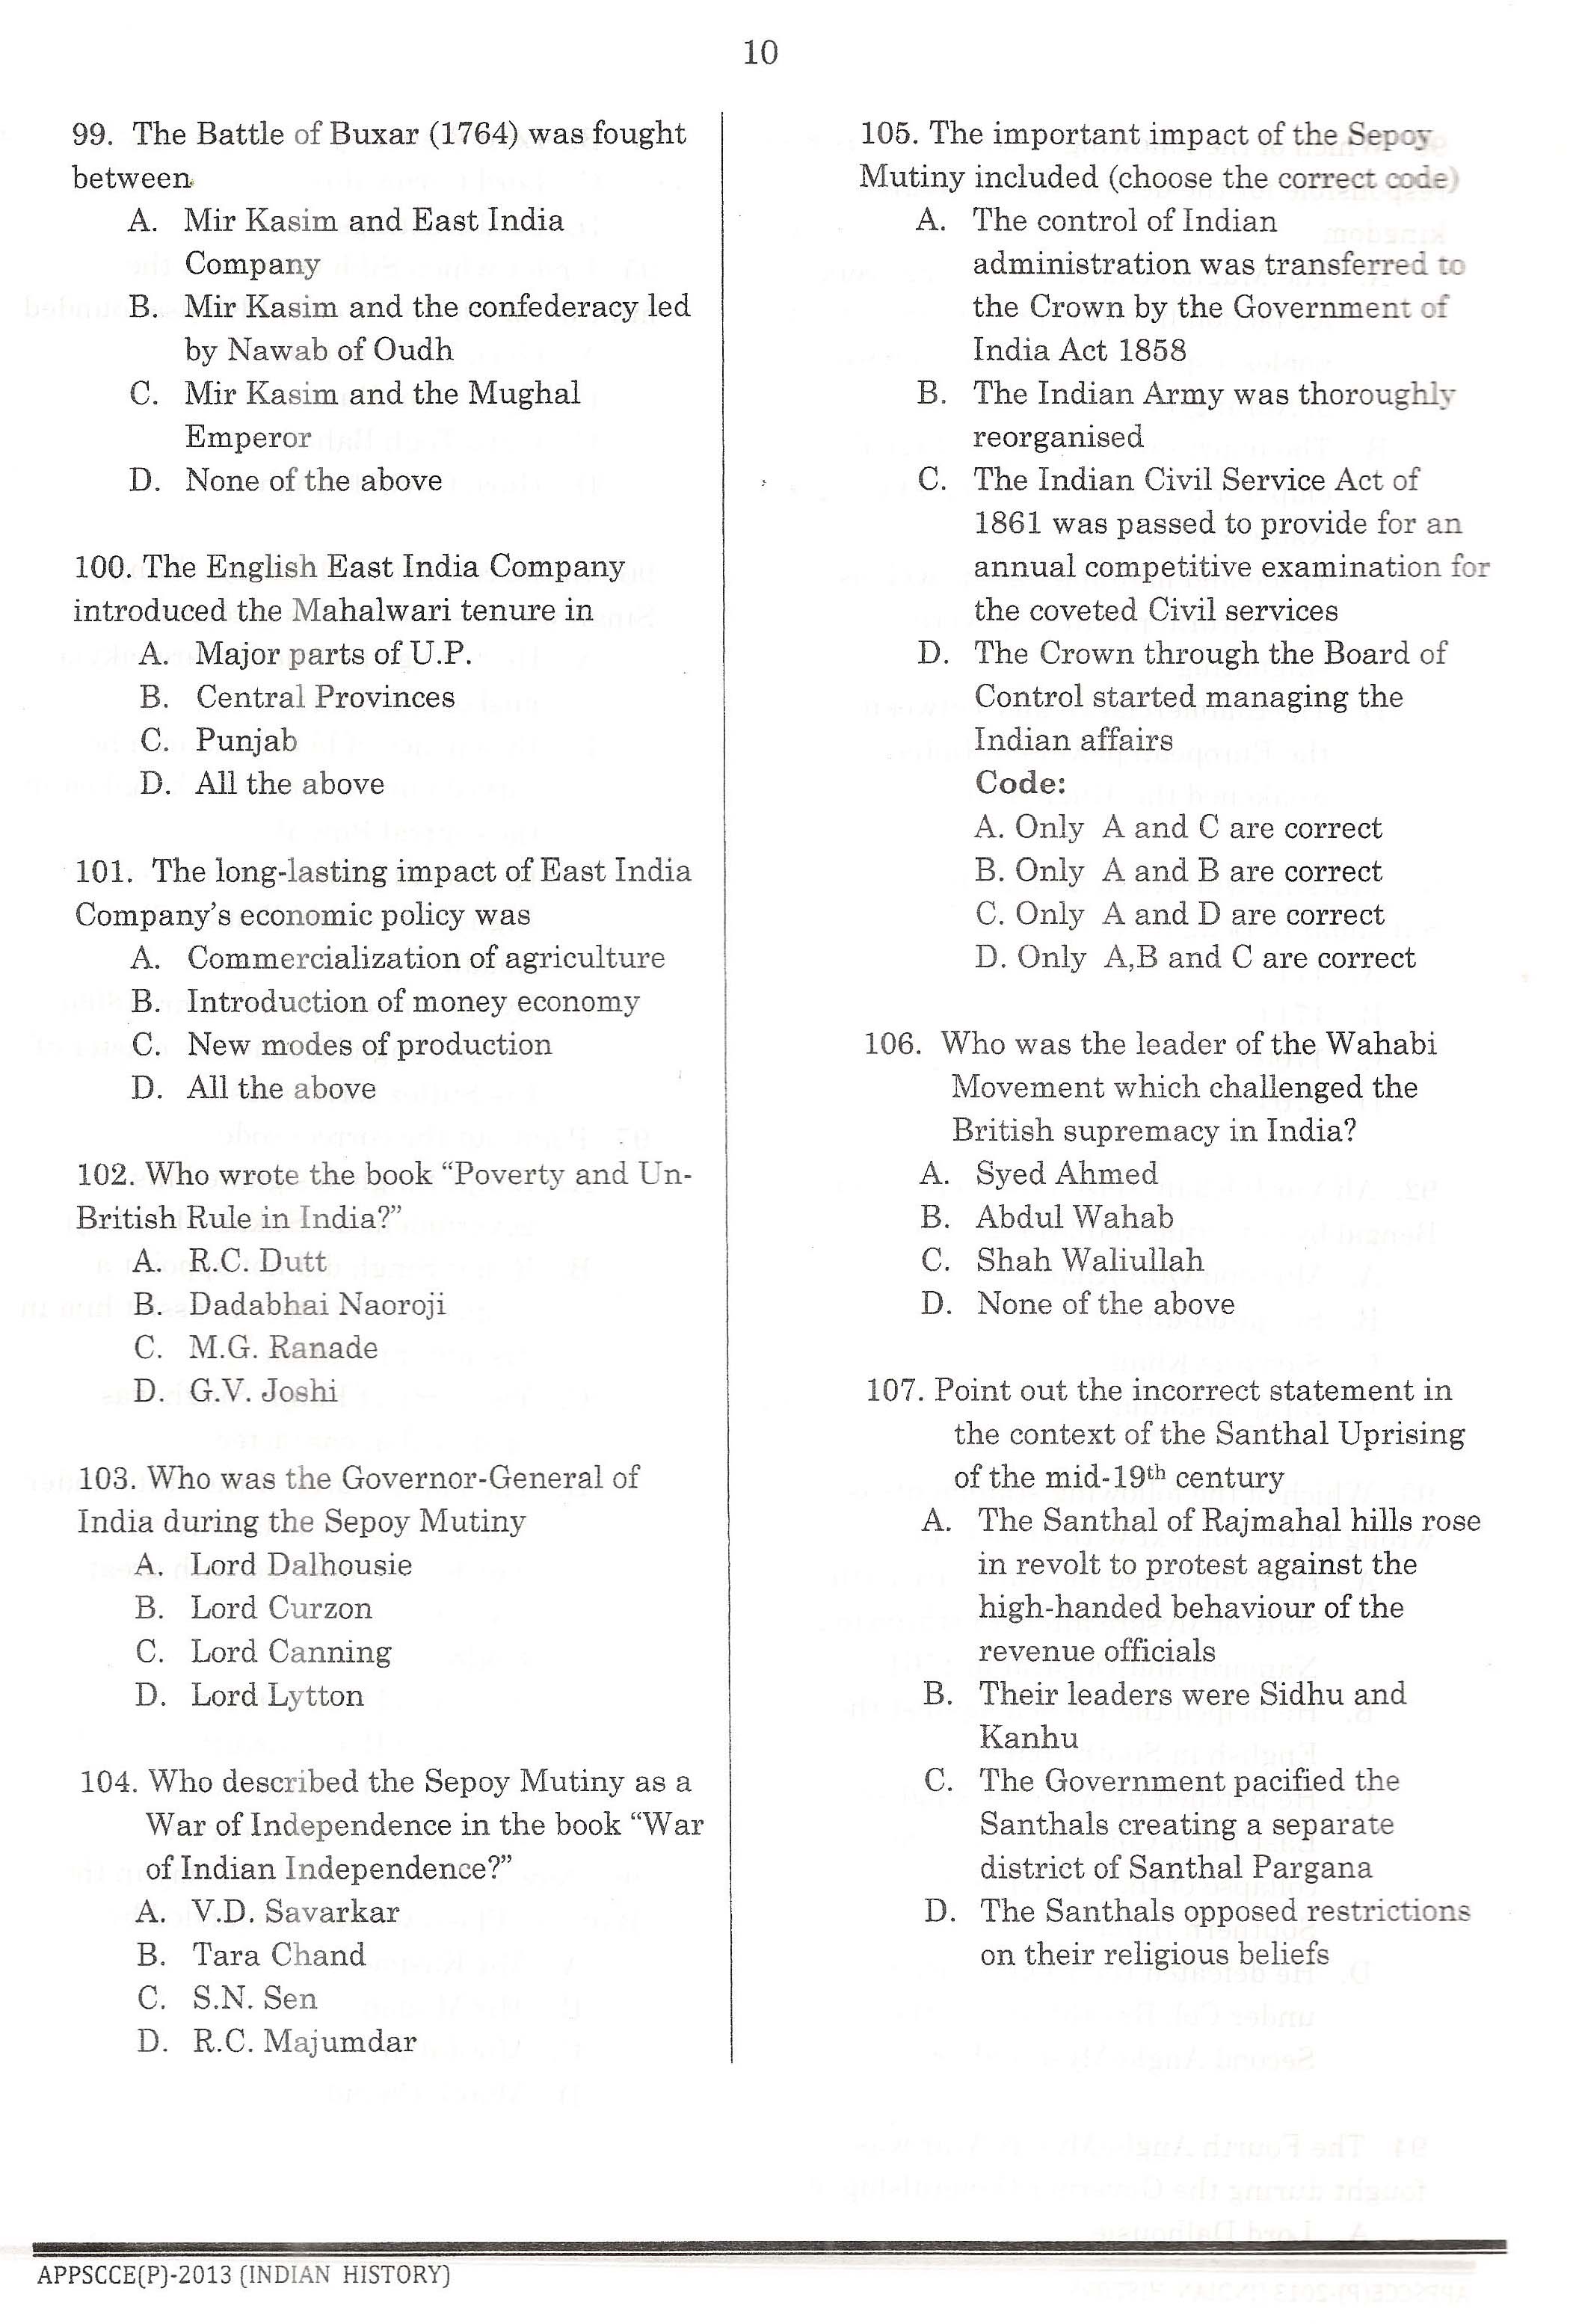 APPSC Combined Competitive Prelims Exam 2013 Indian History 11